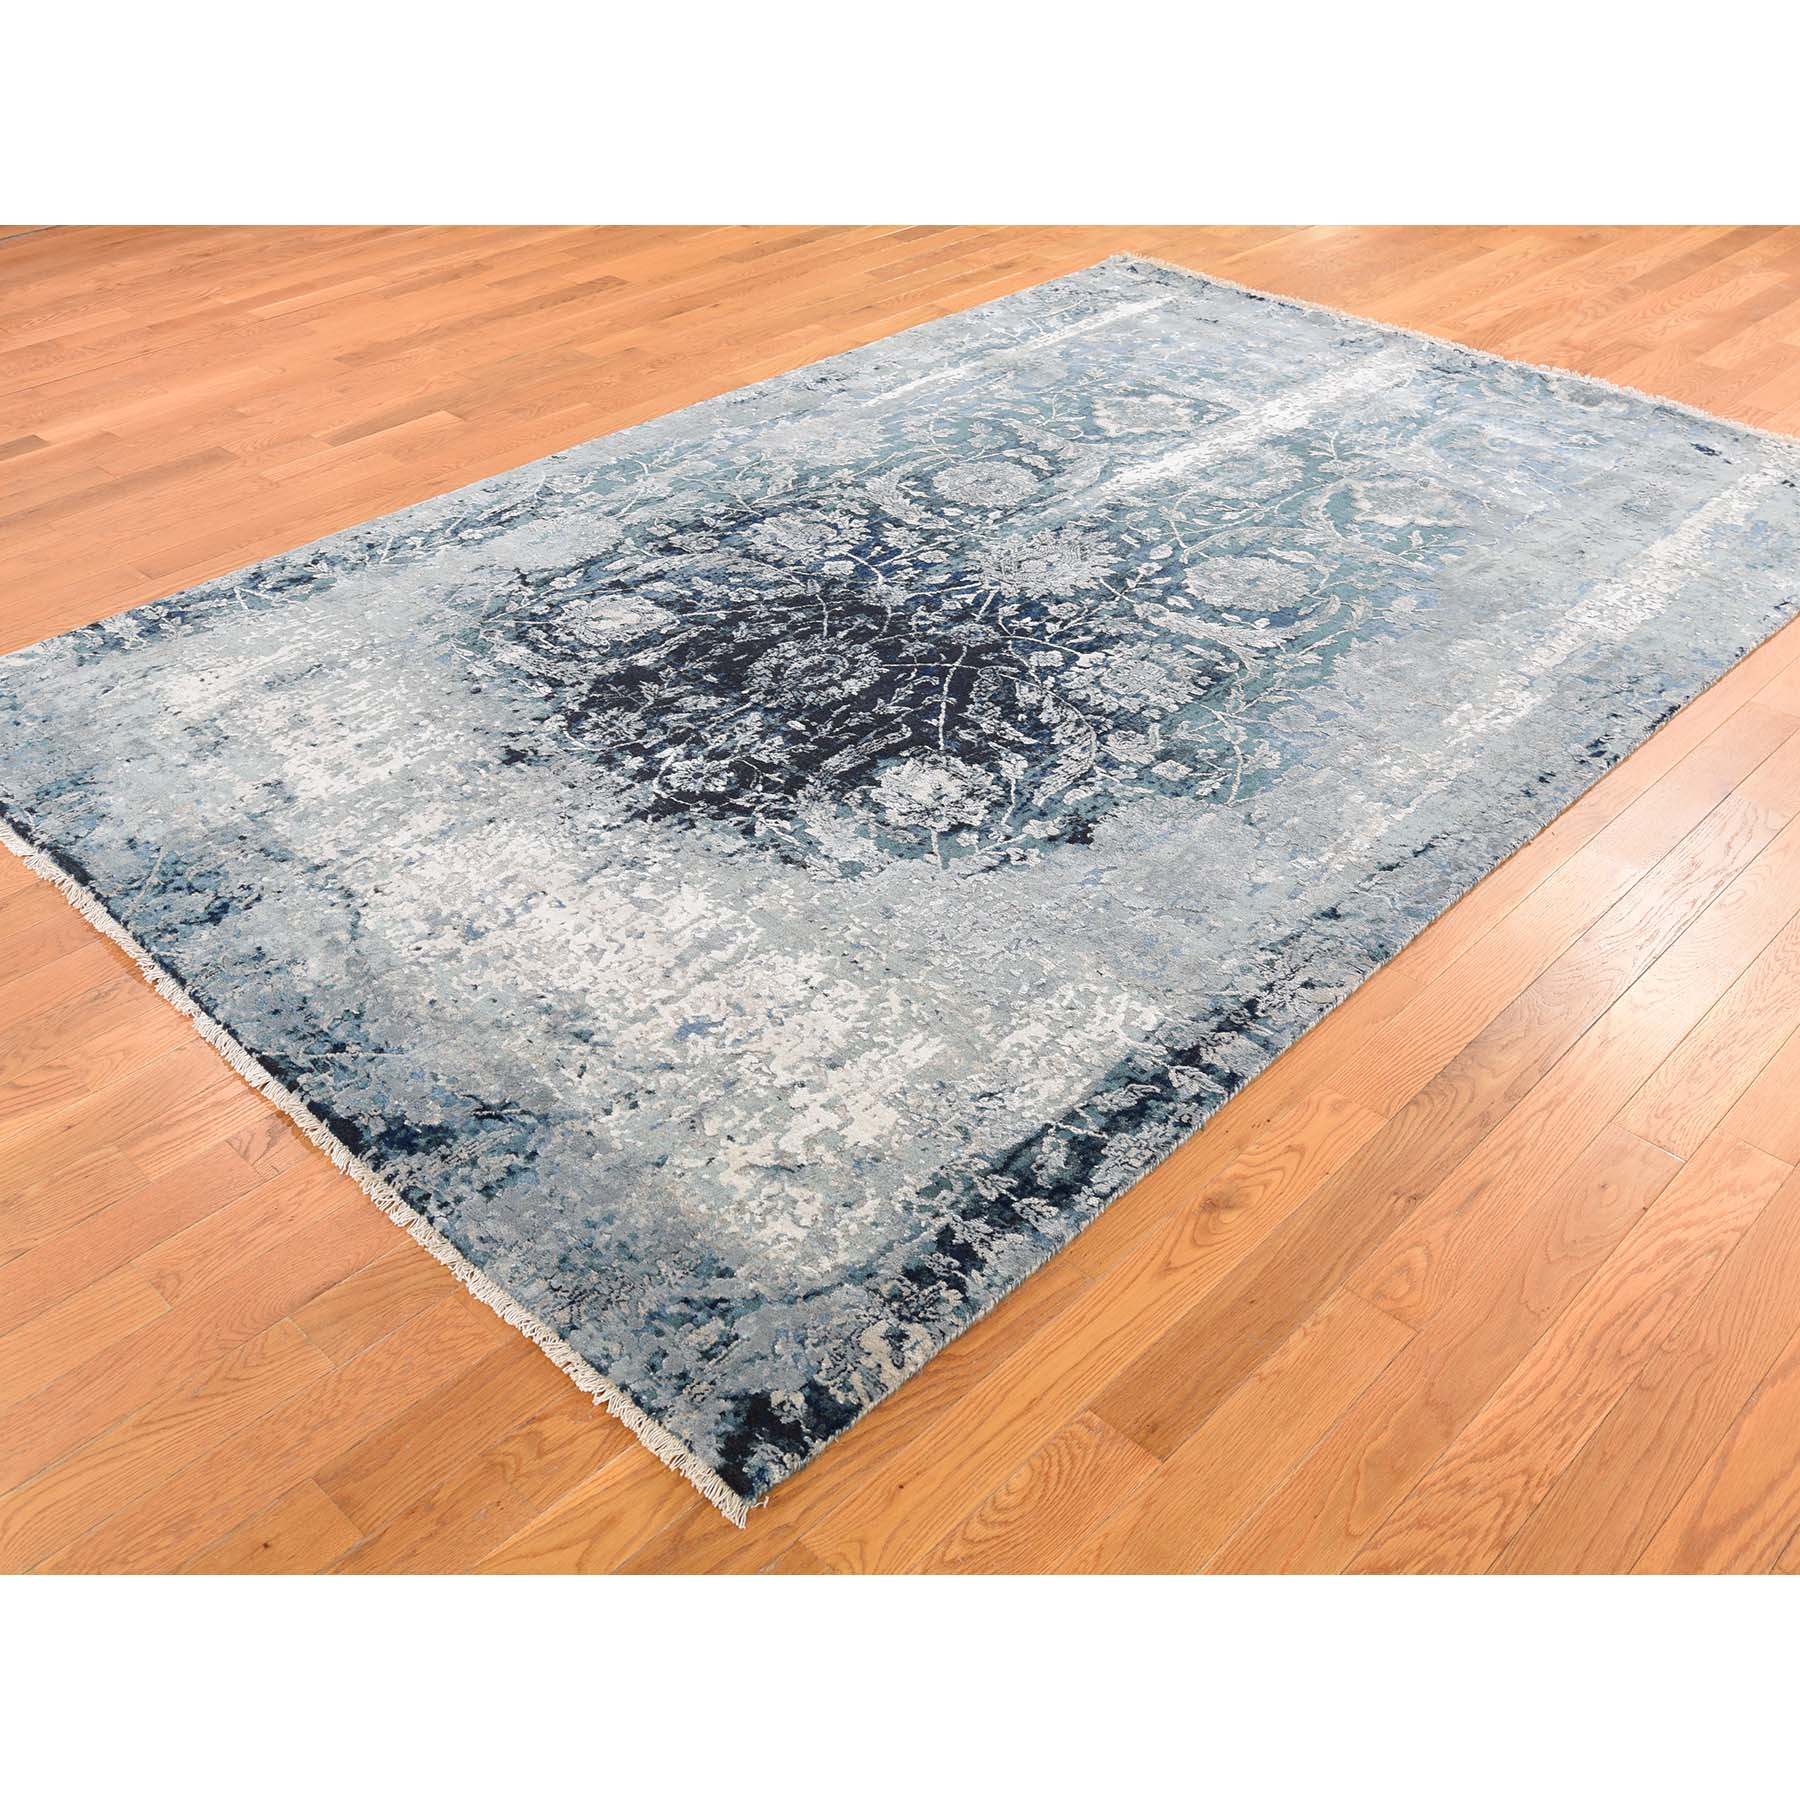 6-x9-2  Blue Persian Tabriz Erased Design Wool And Silk Hand-Knotted Oriental Rug 